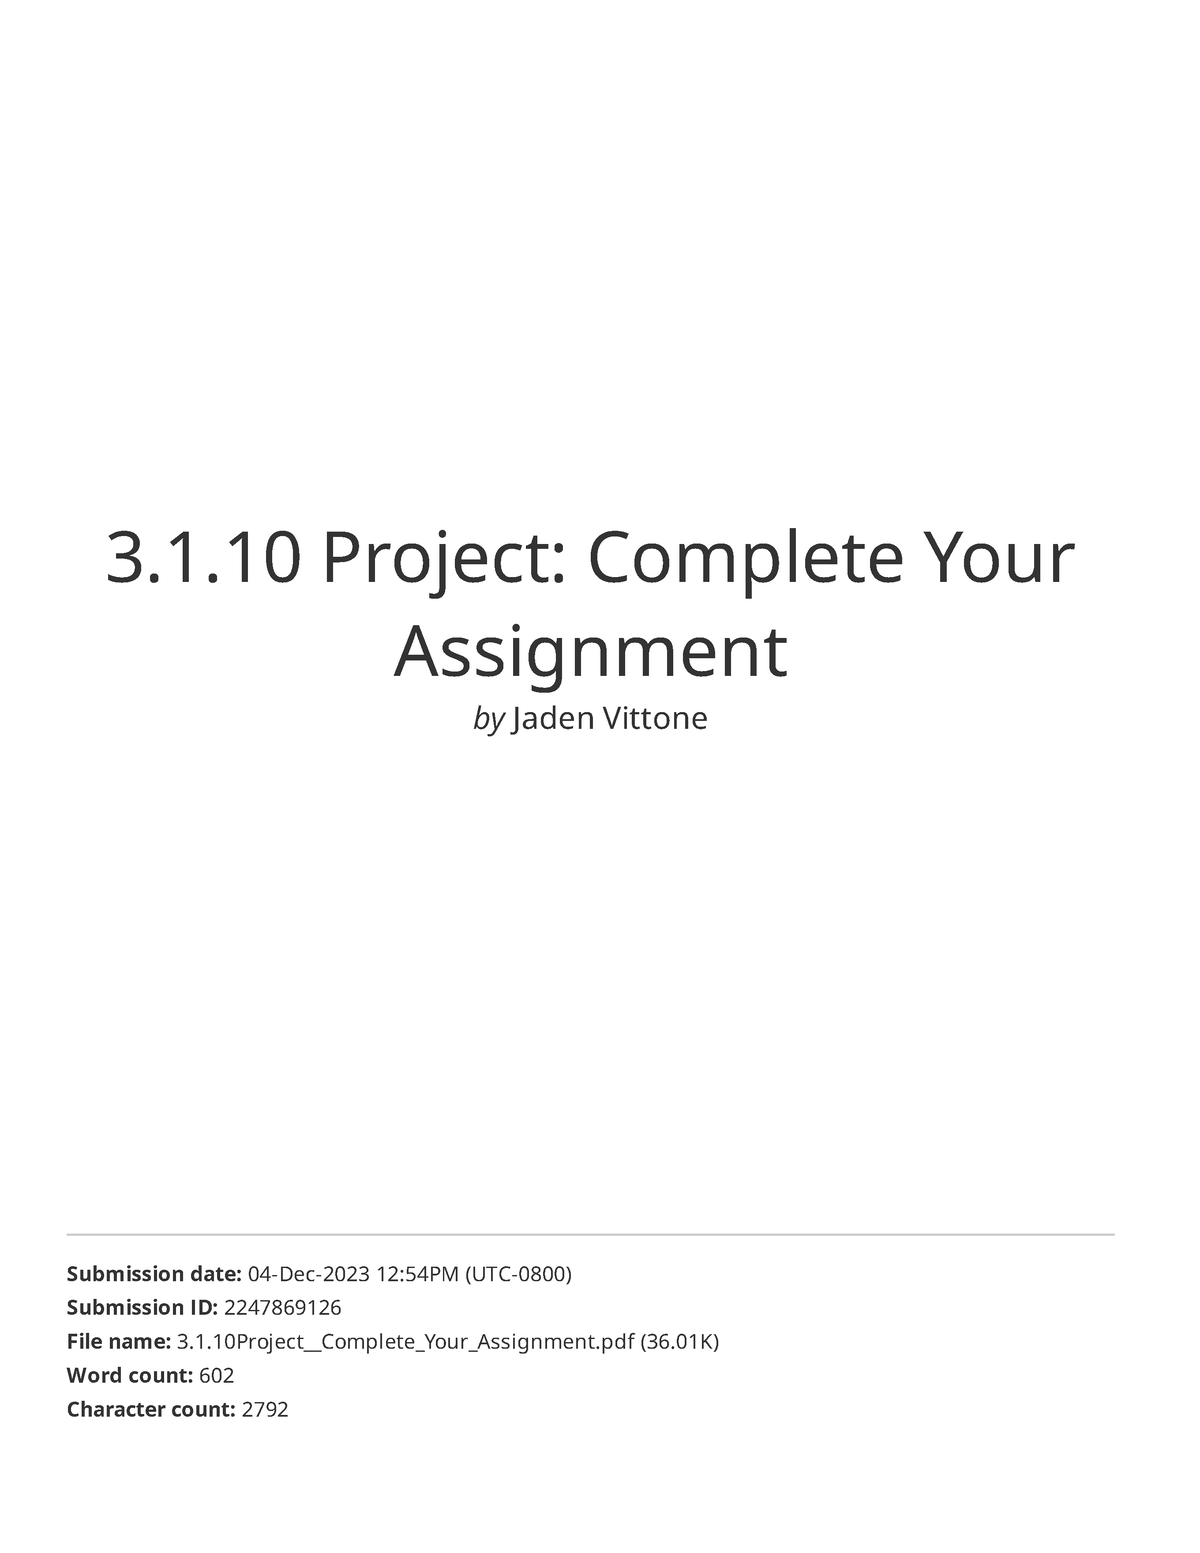 4.3.9 project complete your assignment